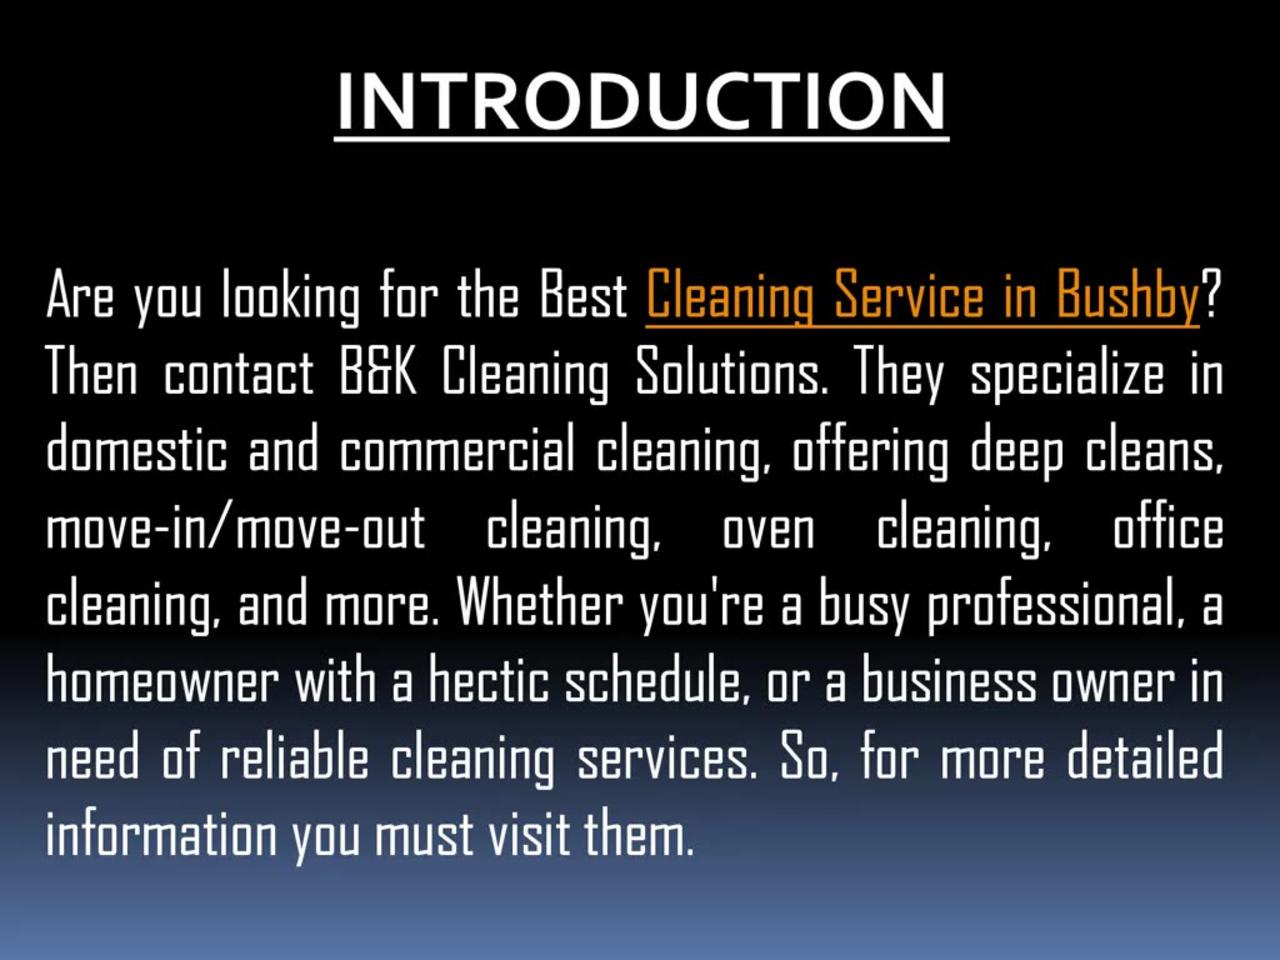 One of the Best Cleaning Service in Bushby